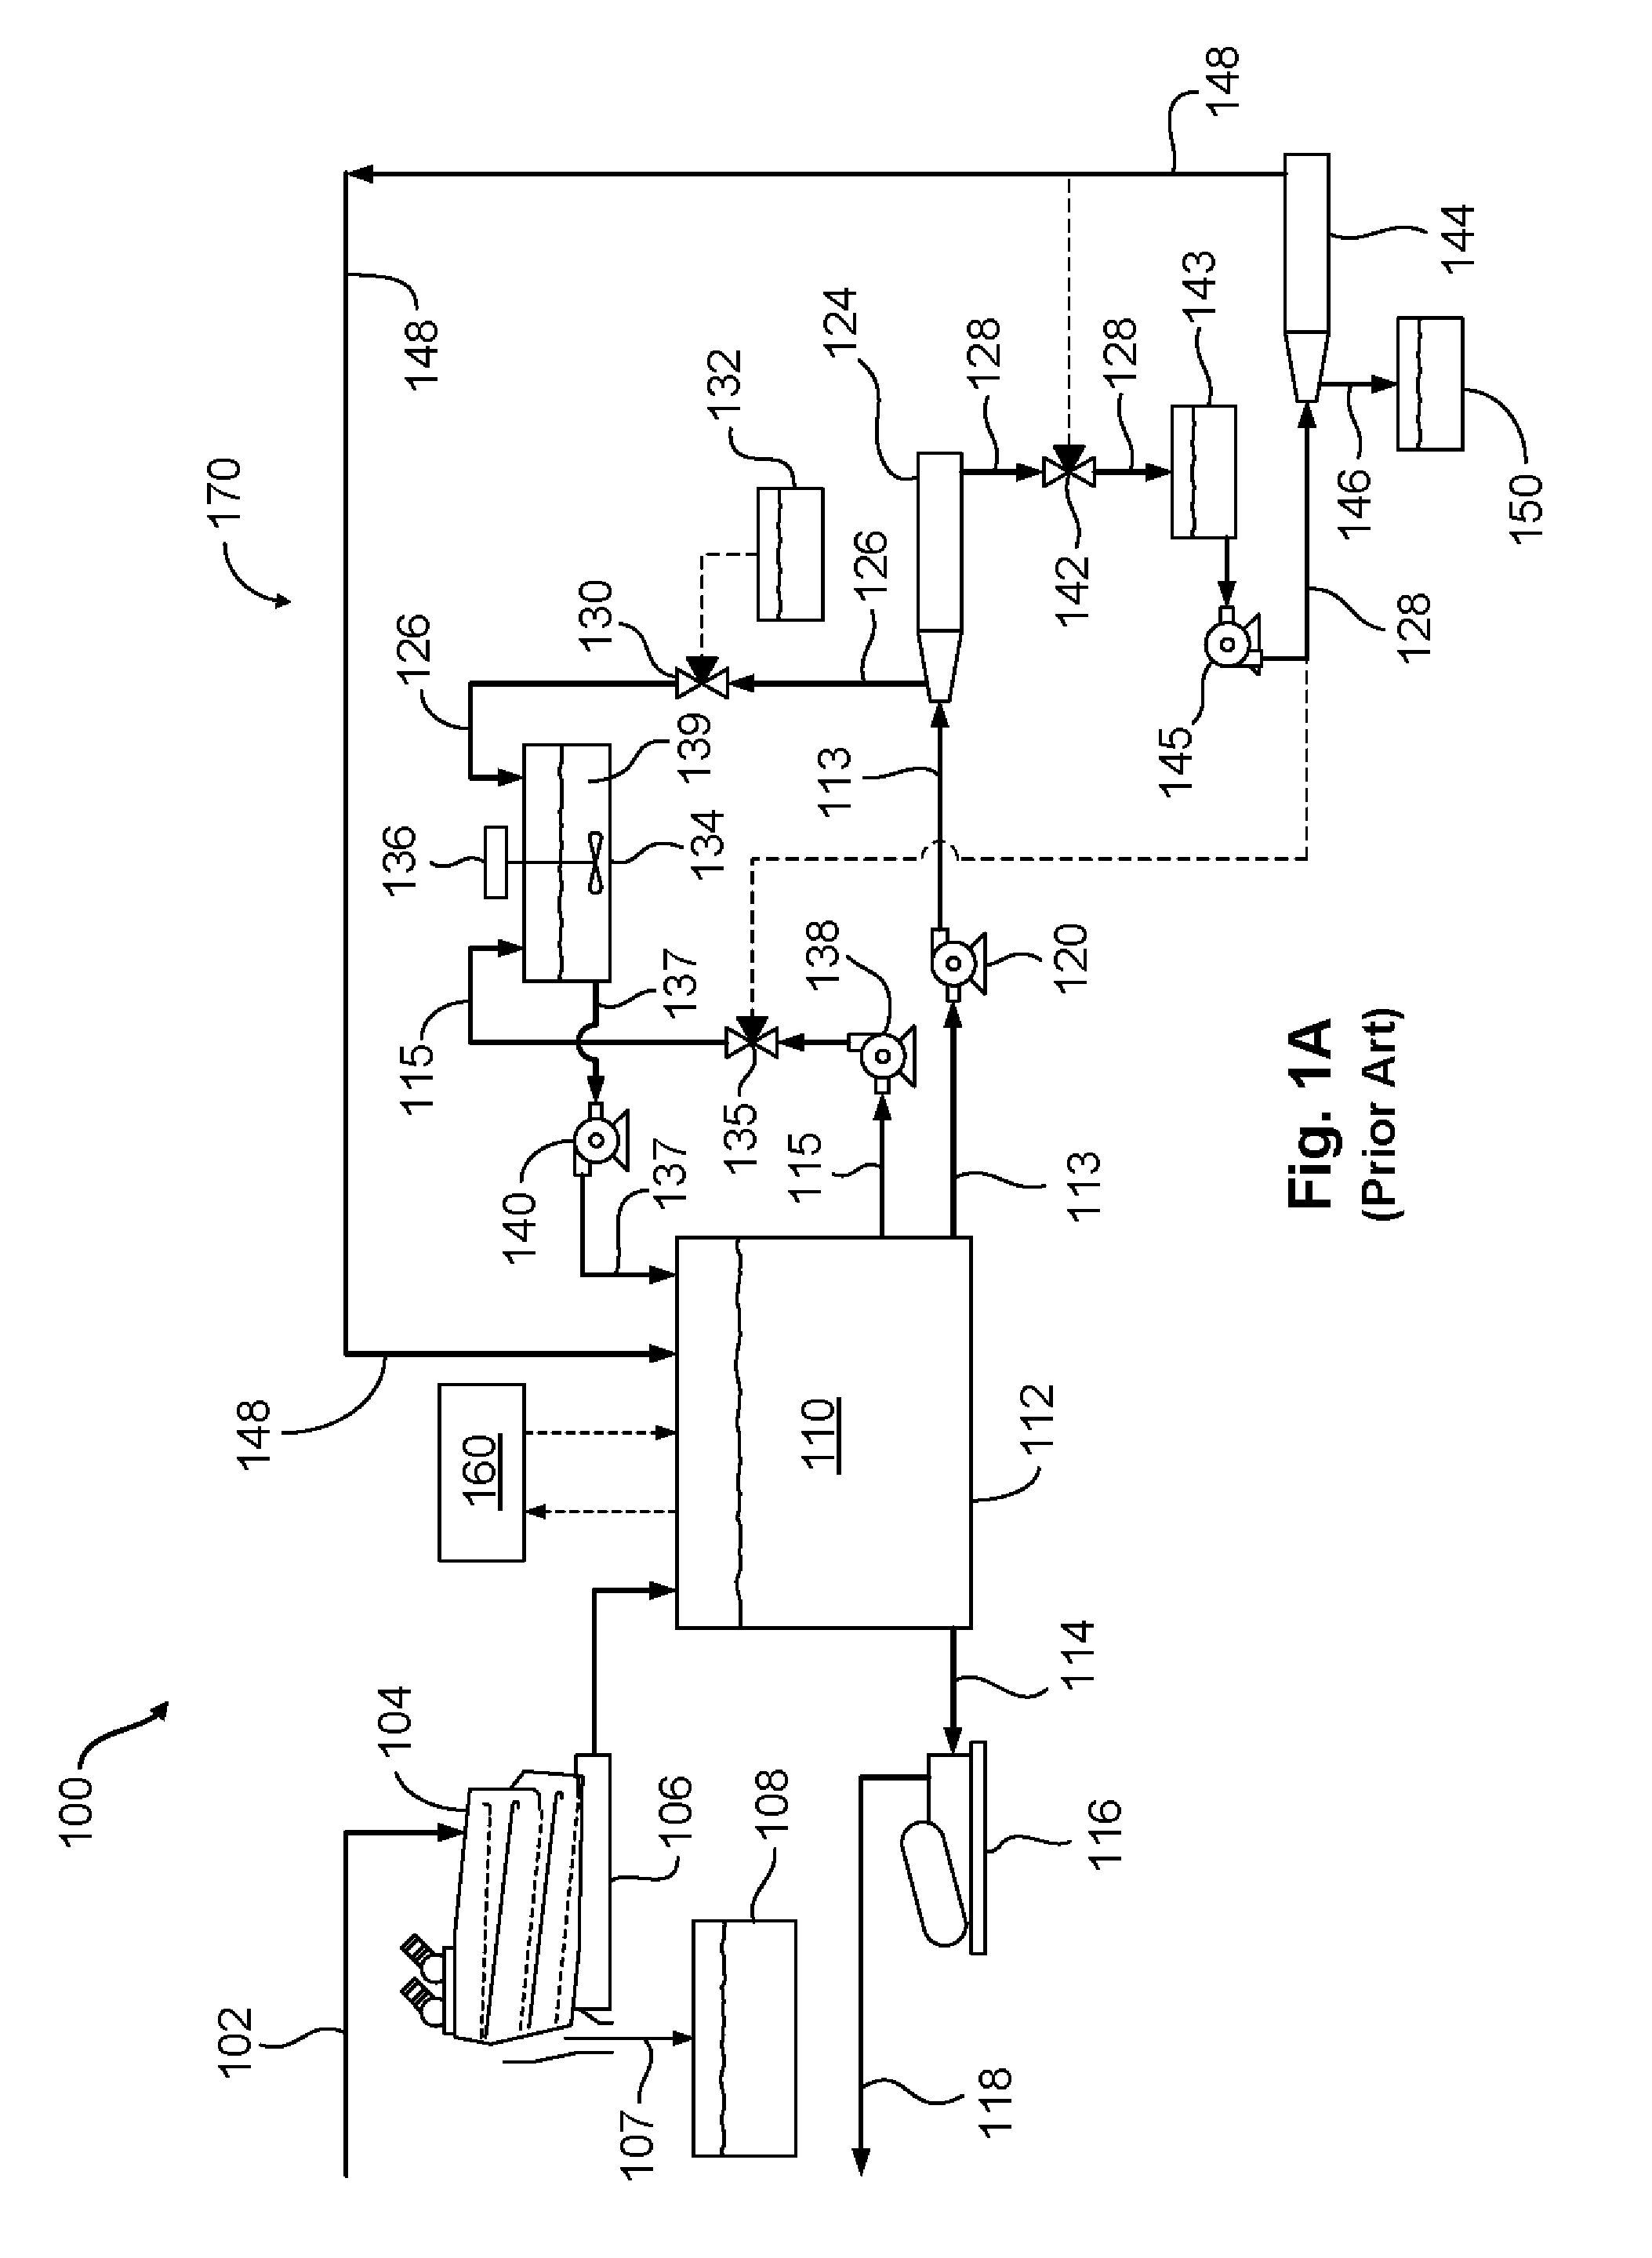 System, apparatus, and method for recovering barite from drilling fluid